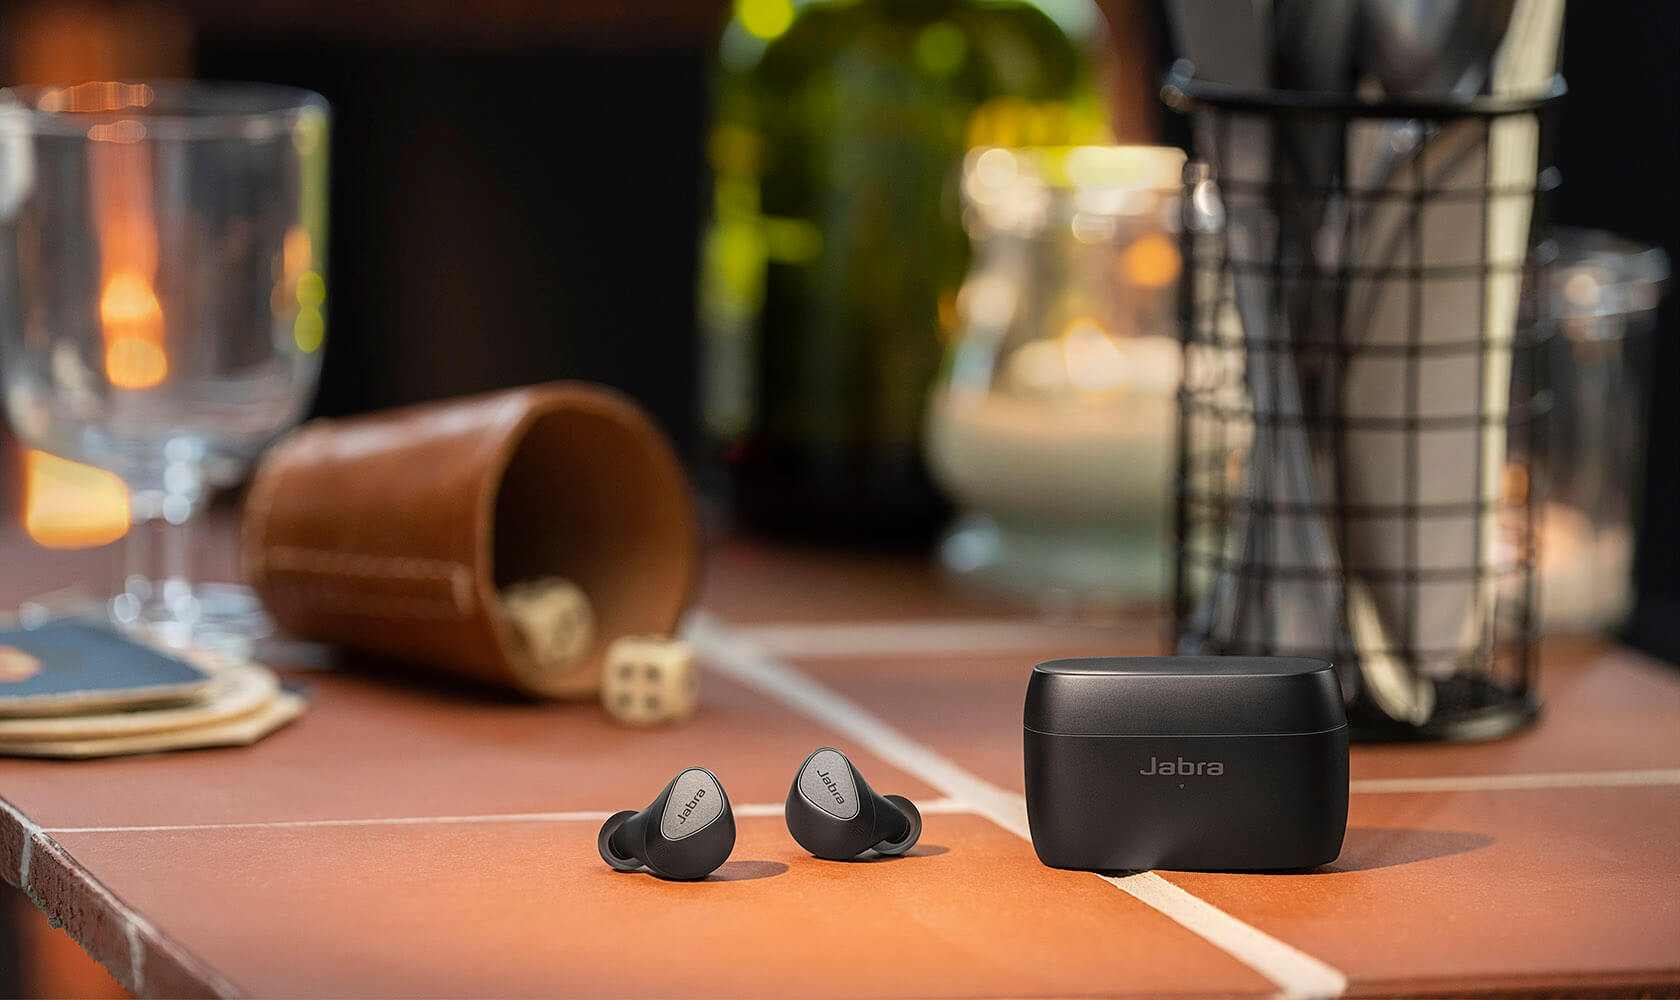 Black Elite 5 earbuds and case in front of a dice game on a bar table